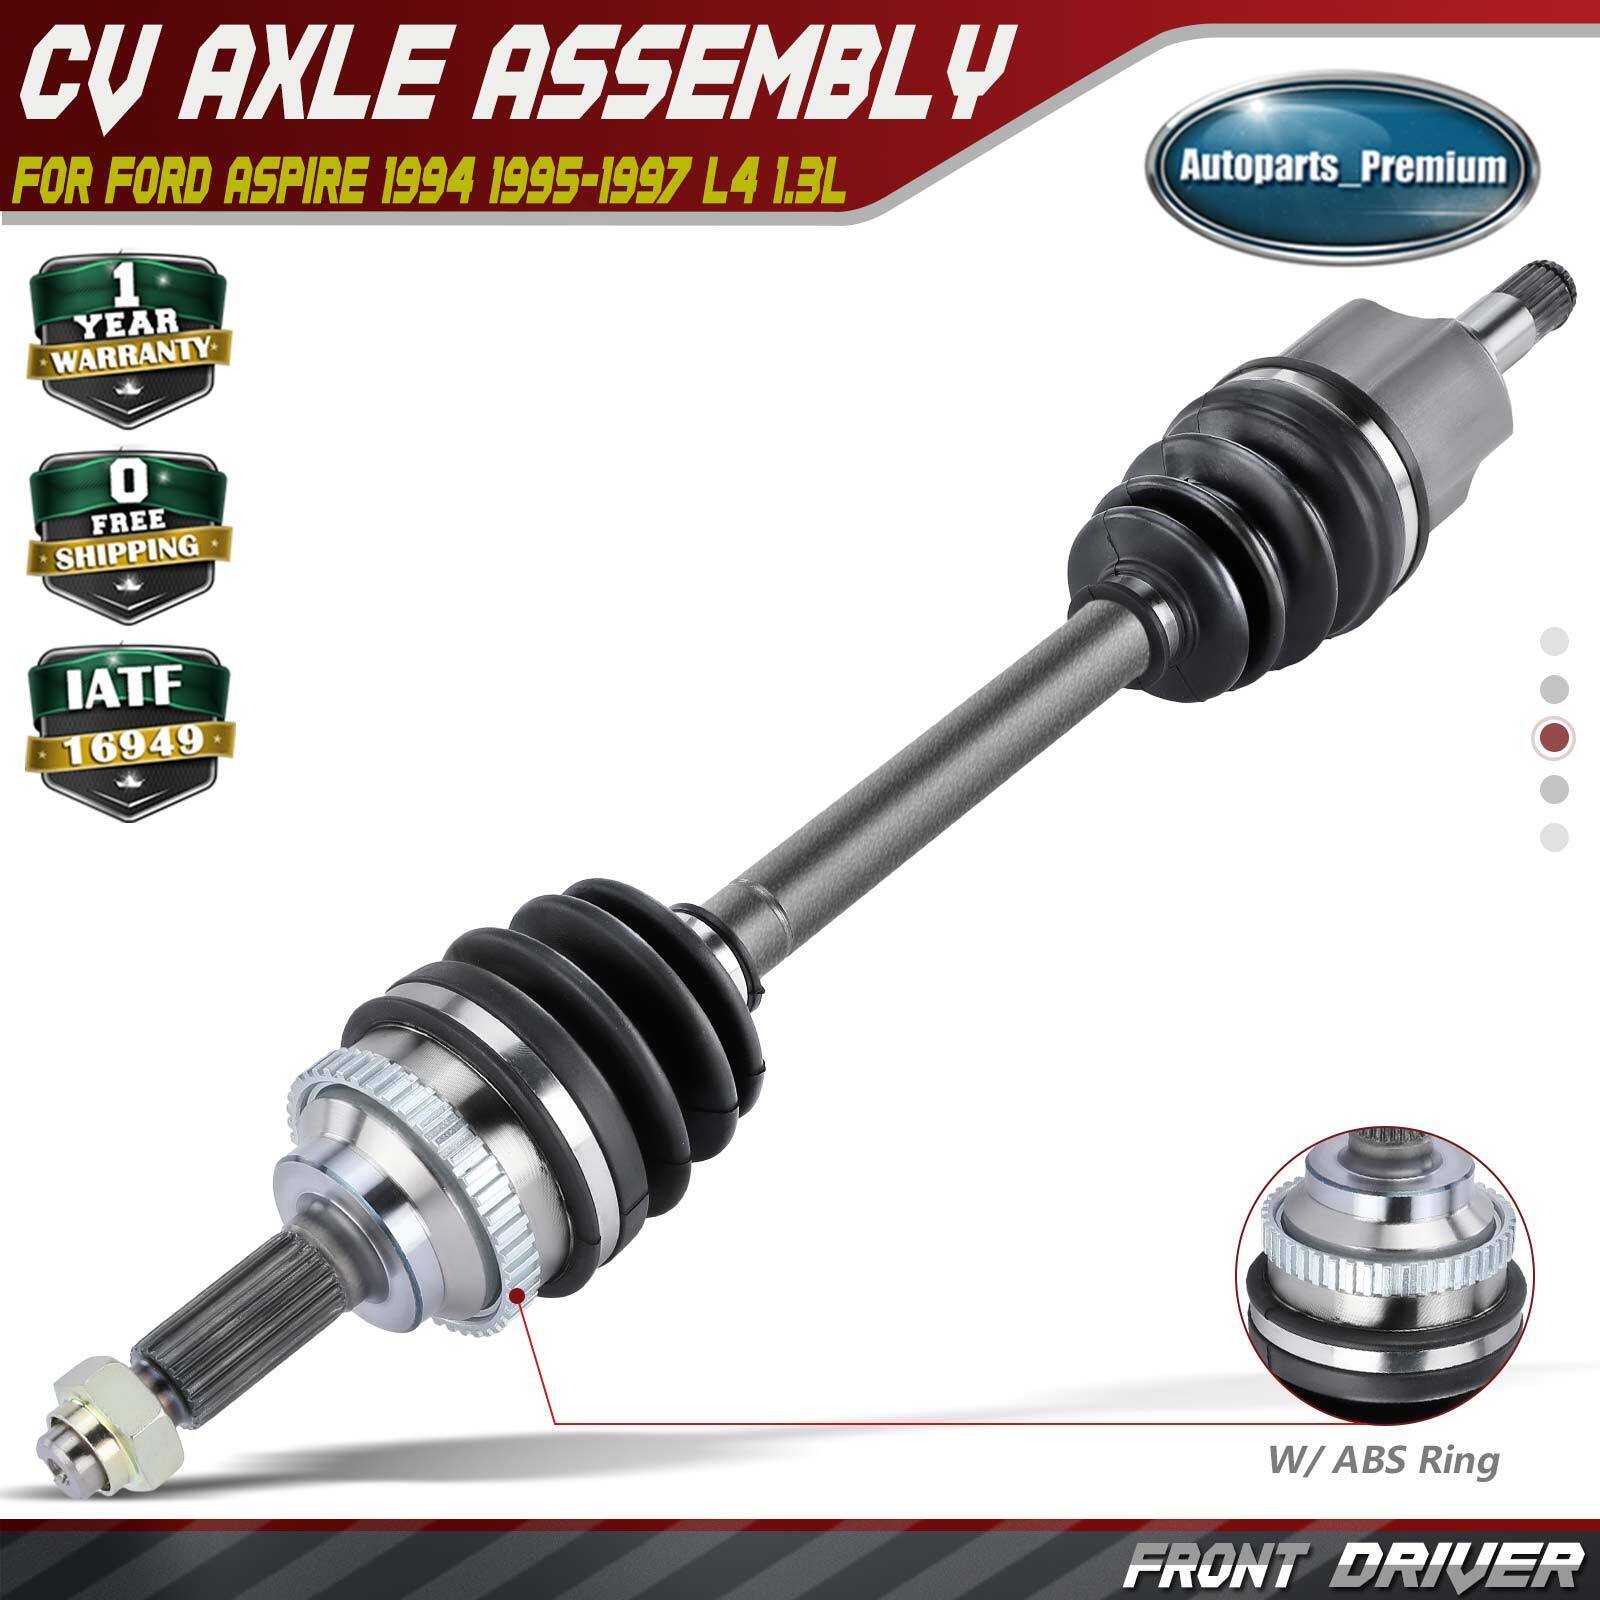 Front Left CV Axle Assembly for Ford Aspire 1994 1995-1997 L4 1.3L Manual Trans.